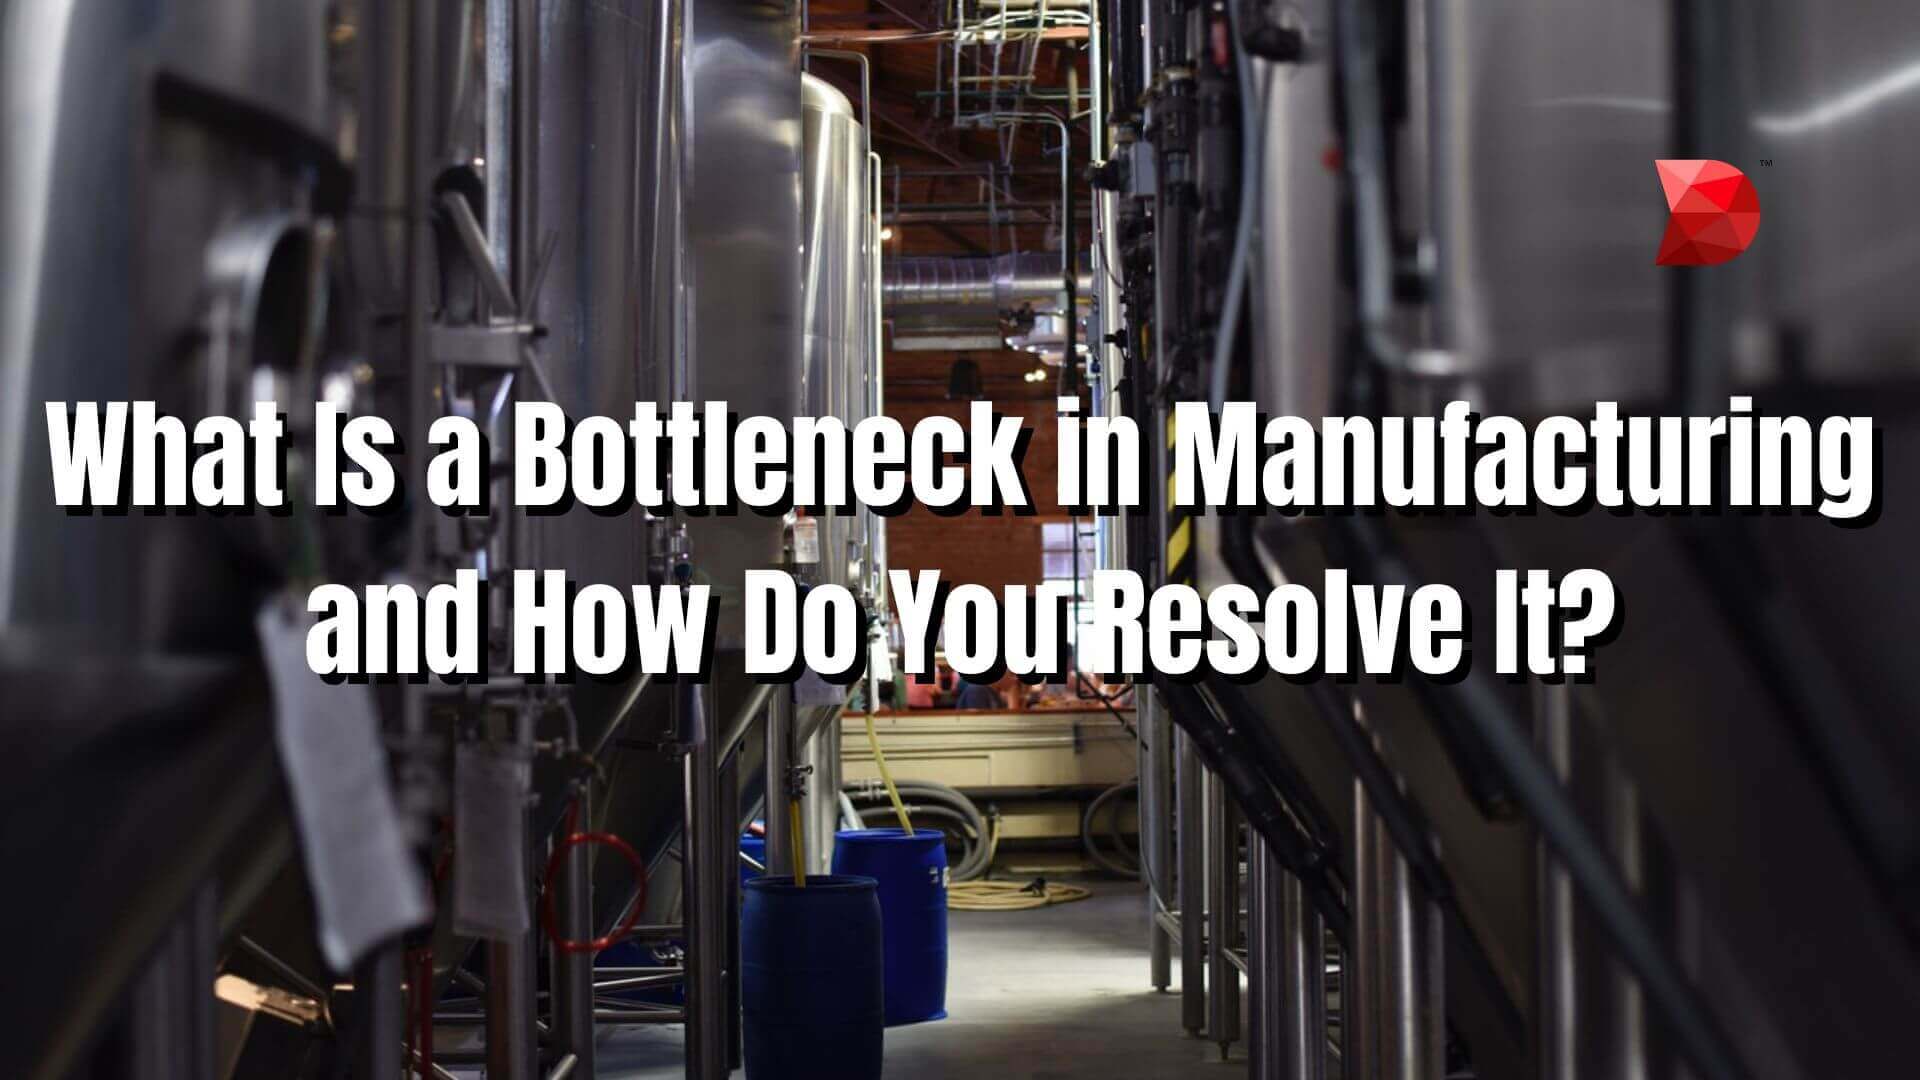 What Is a Bottleneck in Manufacturing and How Do You Resolve It